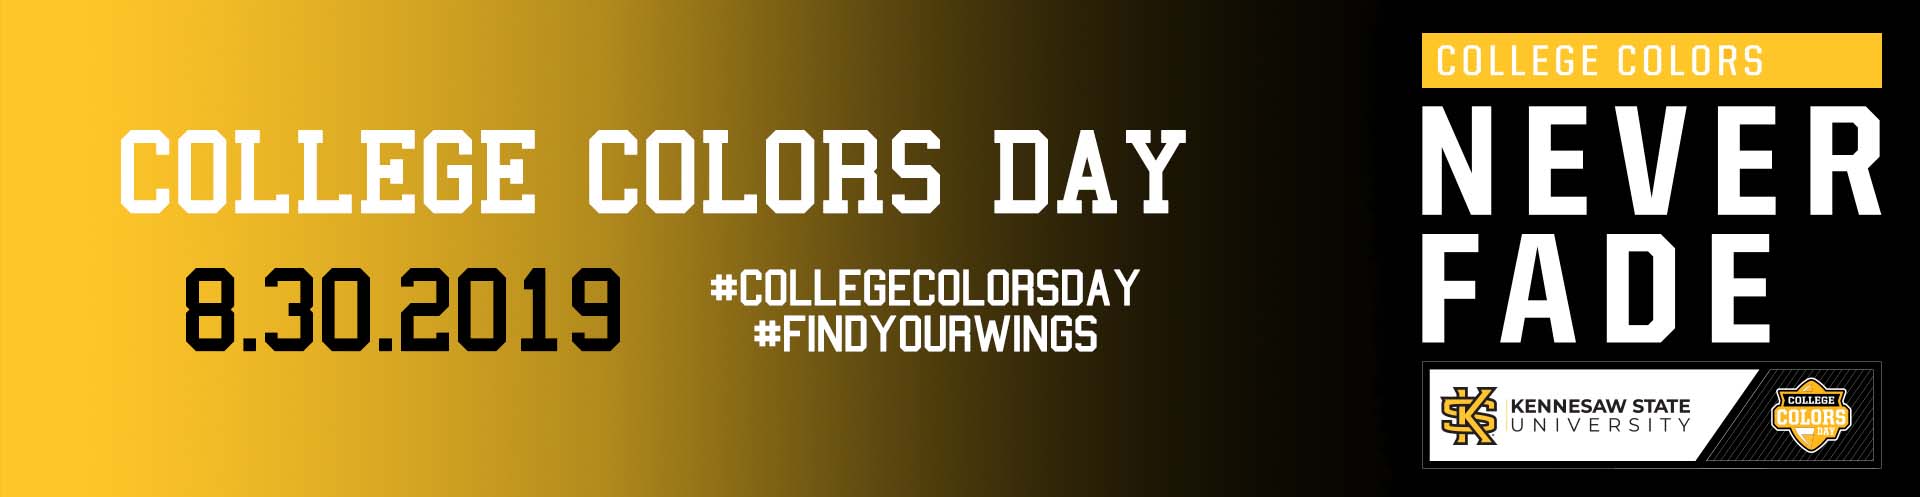 College Colors advertisement - wear black and gold on August 30